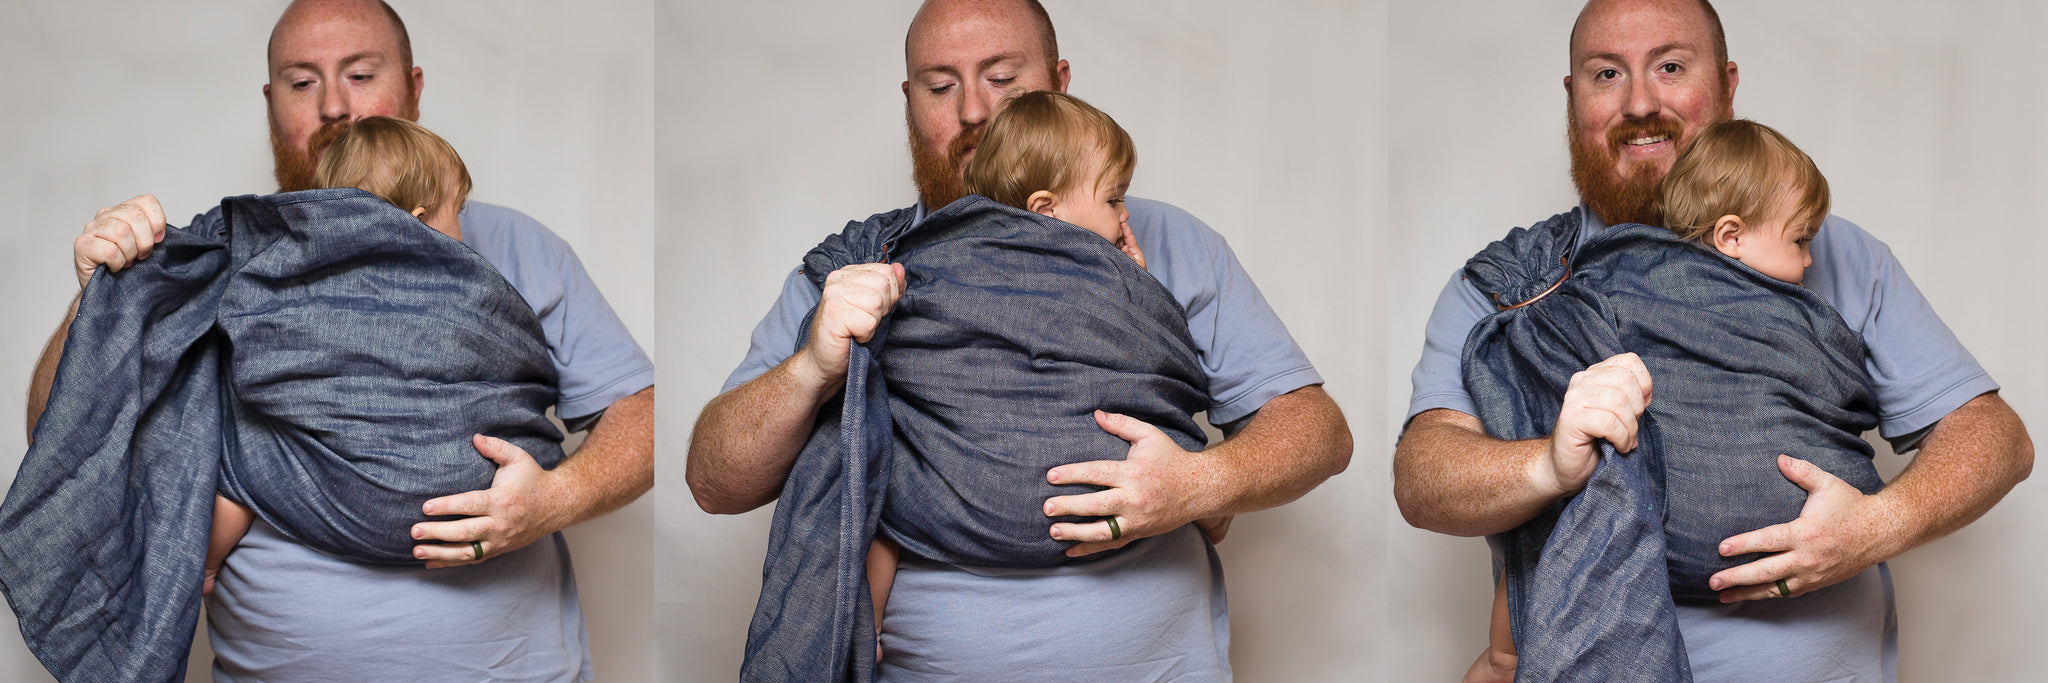 How to use a Studio Tekhni ring sling baby carrier.  Easy, stylish, modern linen fabric carriers from newborn and beyond.  A baby and registry essential item.